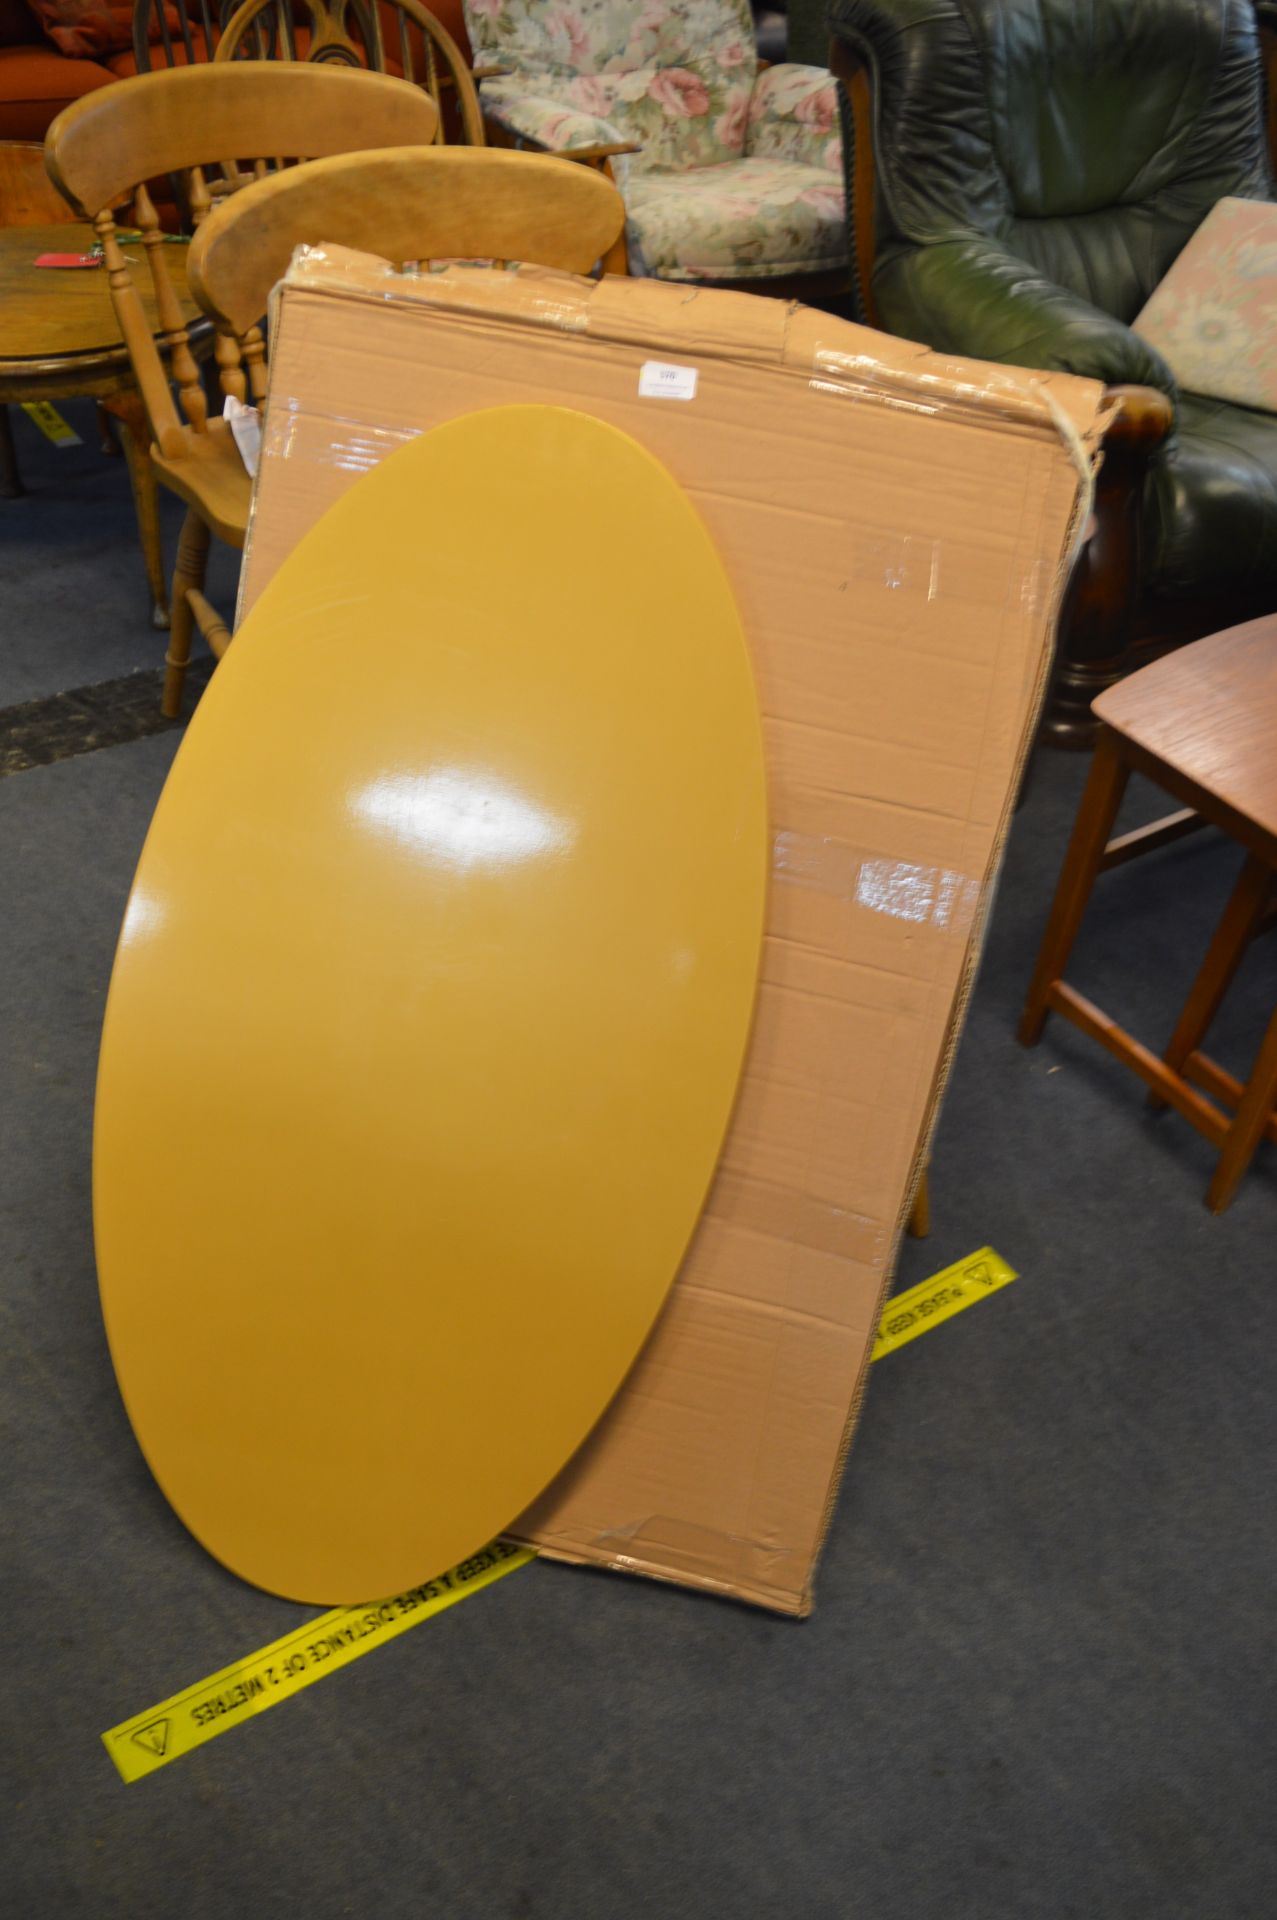 *Gold Painted Oval Coffee Table